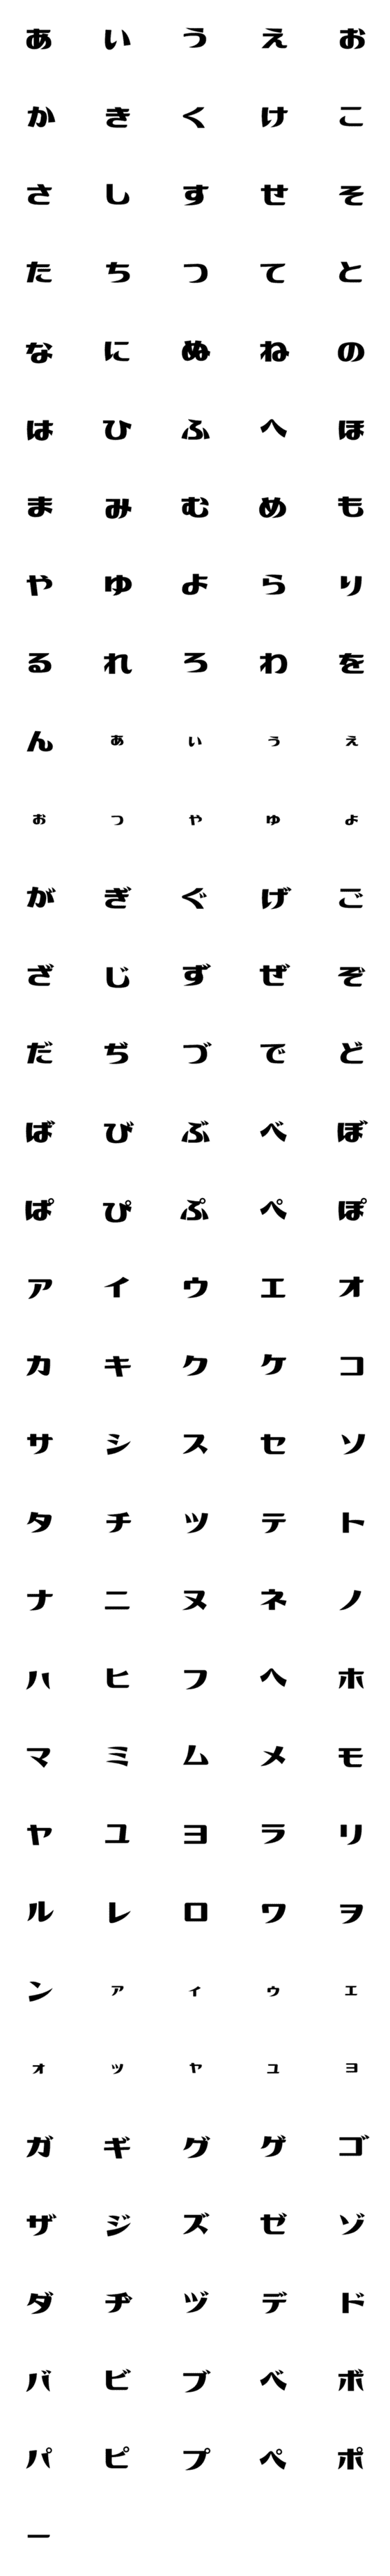 [LINE絵文字]モダンな デコ文字の画像一覧